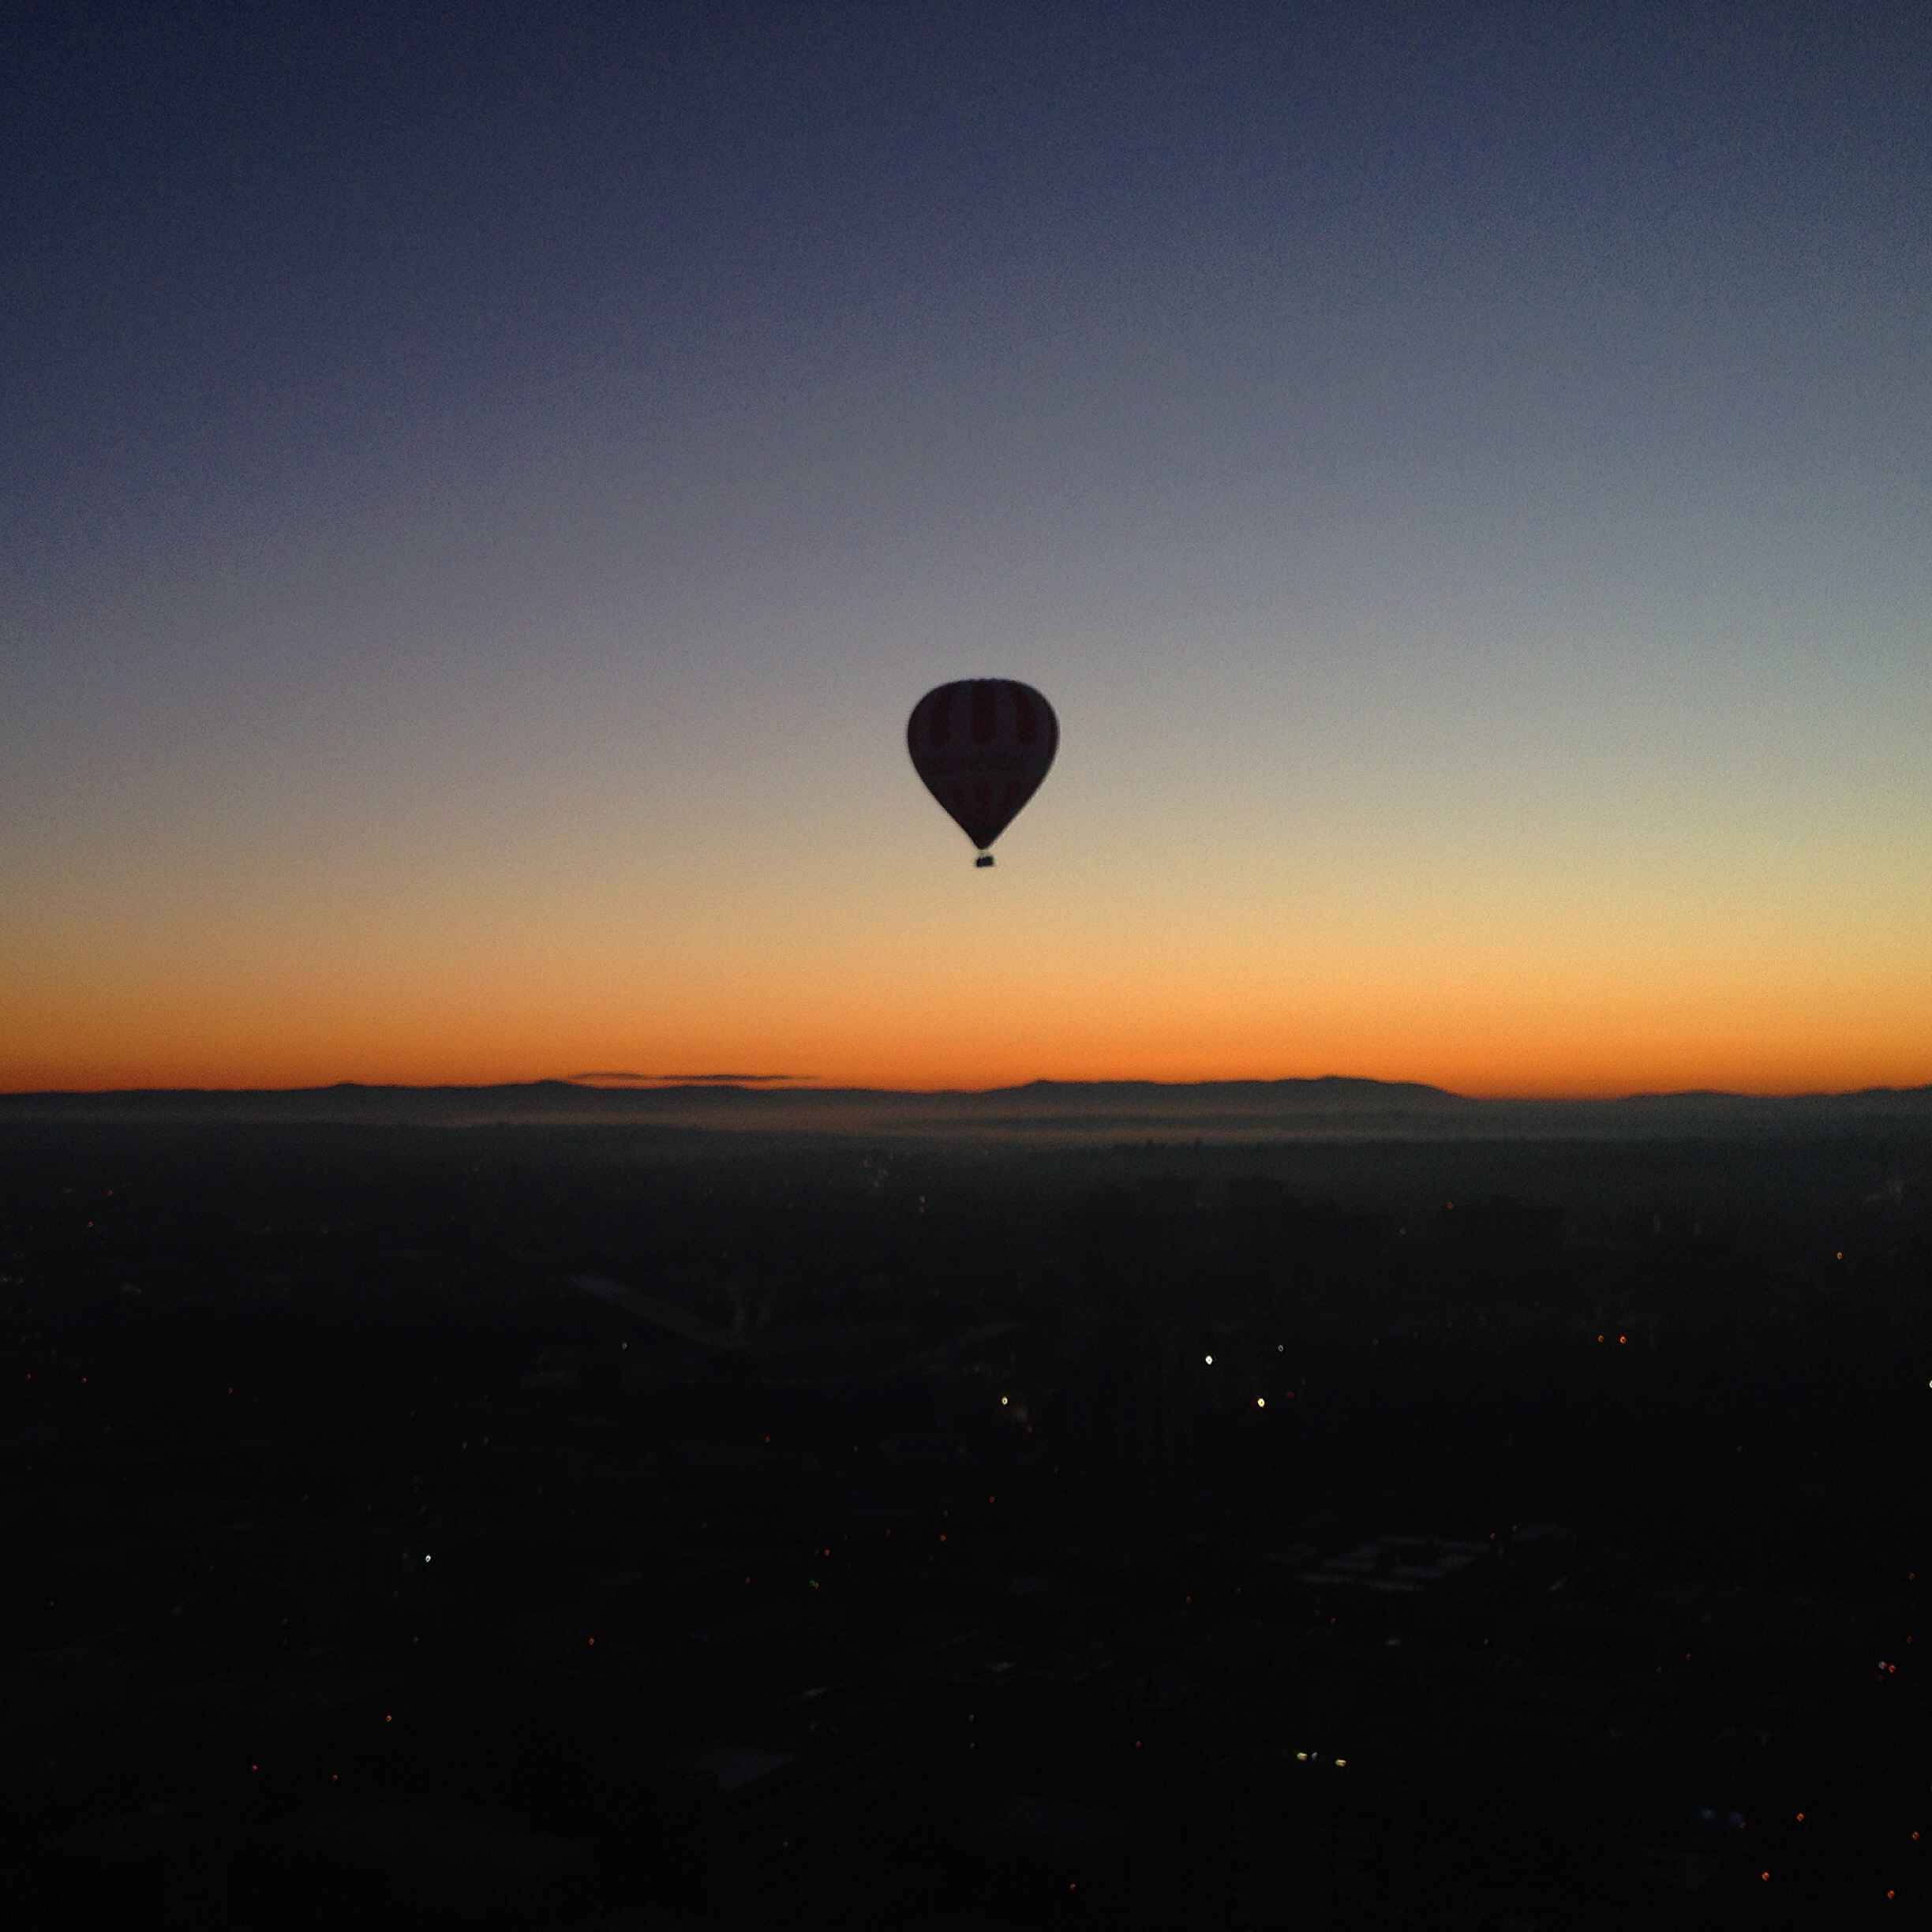 Hot air balloon signifies the start of my day. 